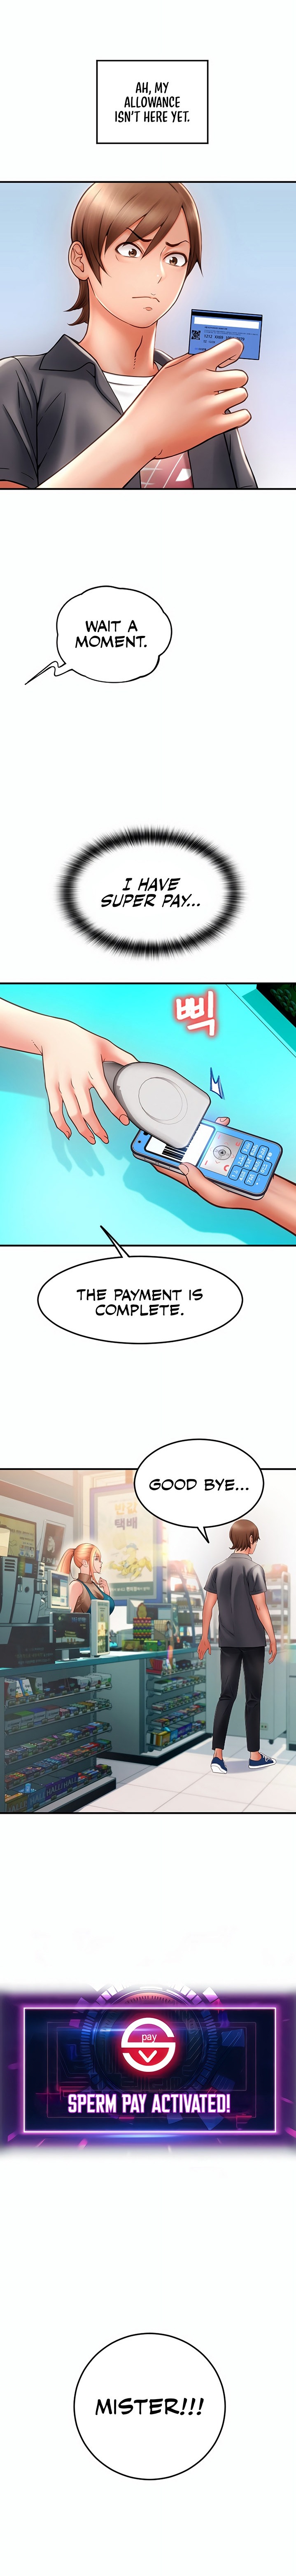 Pay with Sperm Pay - Chapter 2 Page 16